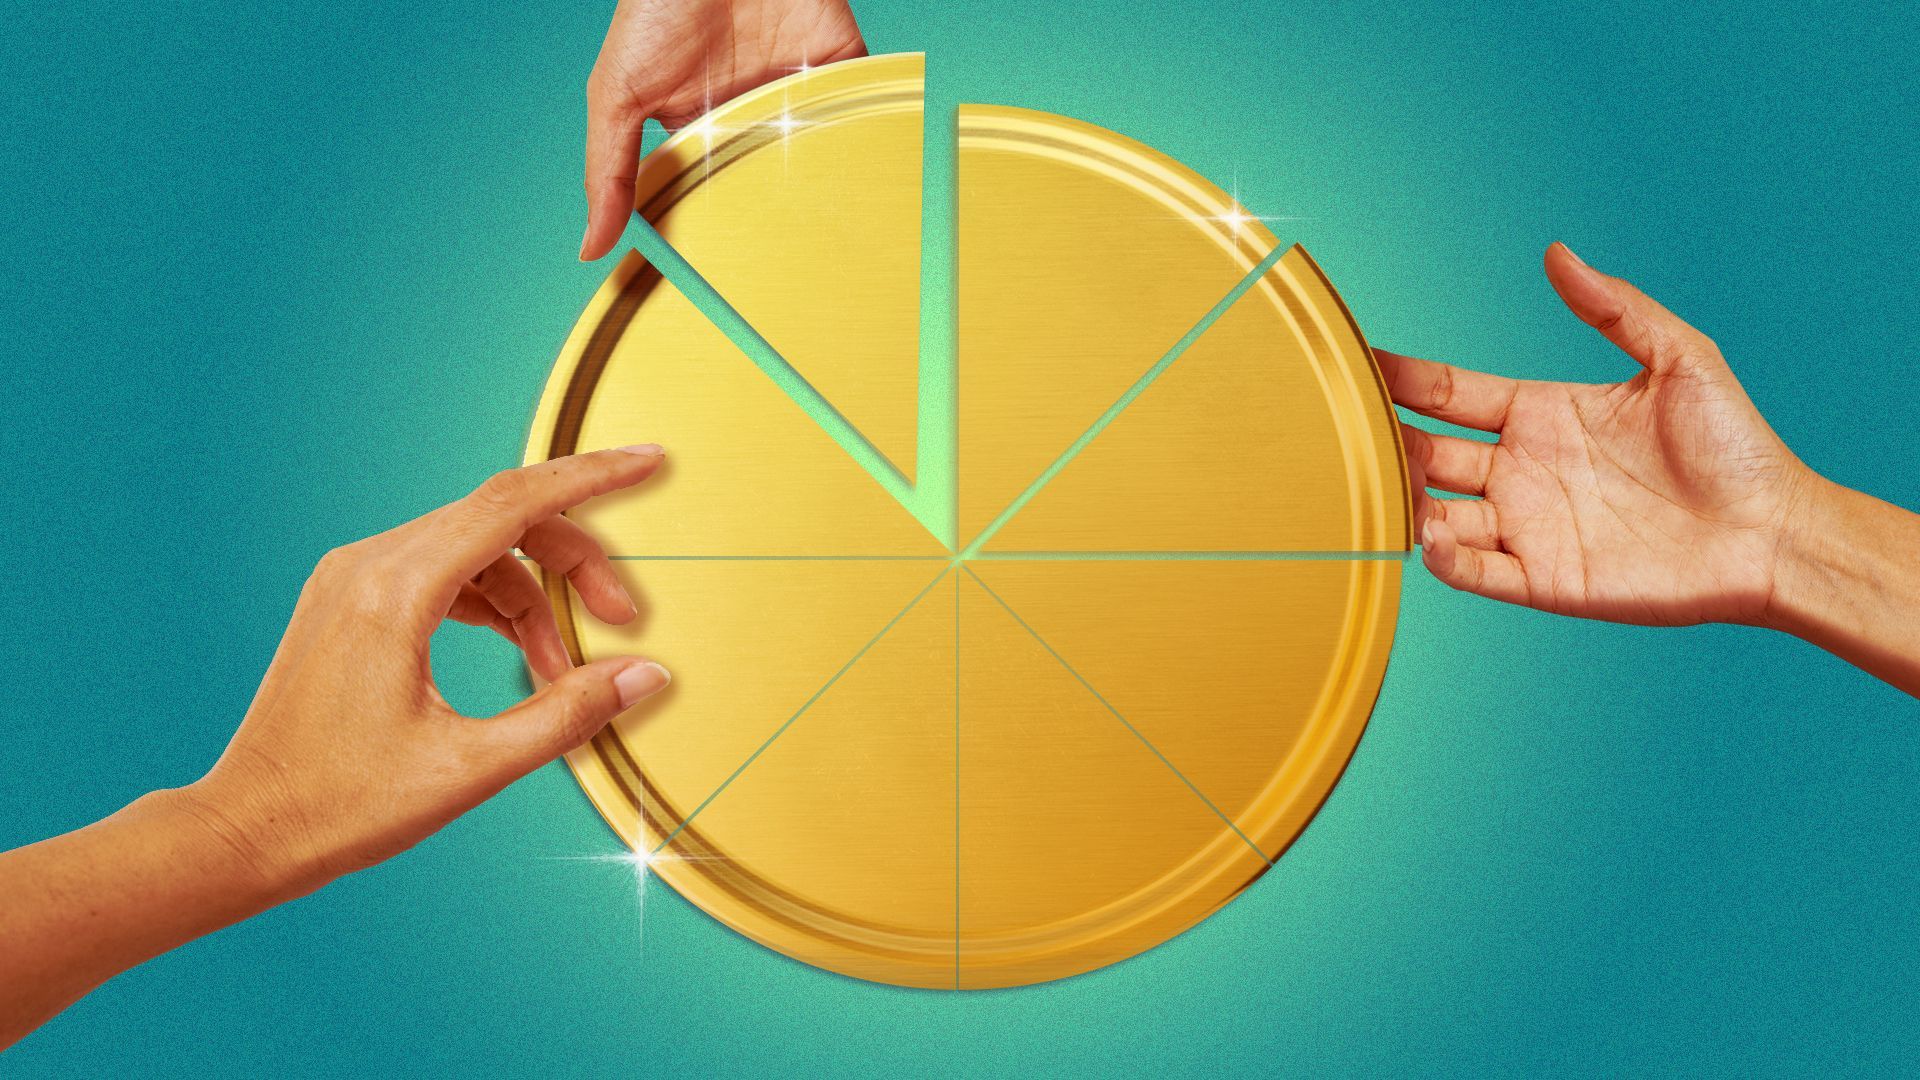 Illustration of hands reaching for a gold coin, cut into pieces like a pie.